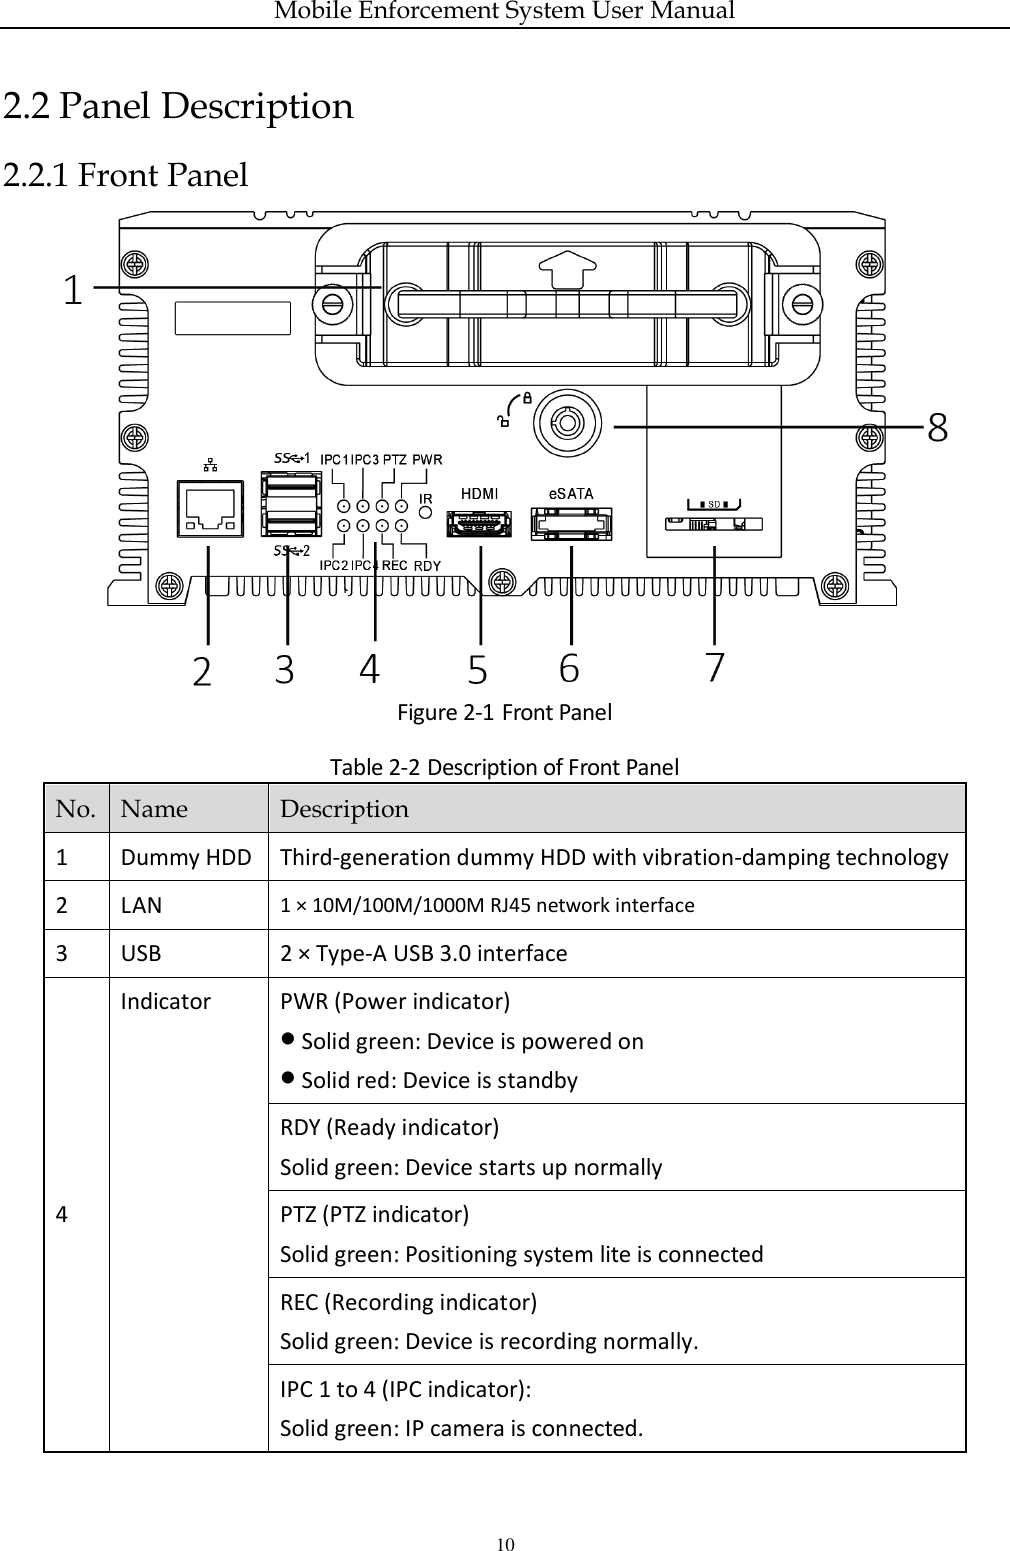 Mobile Enforcement System User Manual 10 2.2 Panel Description 2.2.1 Front Panel  Figure 2-1 Front Panel Table 2-2 Description of Front Panel No.  Name  Description 1  Dummy HDD  Third-generation dummy HDD with vibration-damping technology 2  LAN  1 × 10M/100M/1000M RJ45 network interface 3  USB  2 × Type-A USB 3.0 interface 4 Indicator  PWR (Power indicator)  Solid green: Device is powered on  Solid red: Device is standby RDY (Ready indicator) Solid green: Device starts up normally PTZ (PTZ indicator) Solid green: Positioning system lite is connected REC (Recording indicator) Solid green: Device is recording normally. IPC 1 to 4 (IPC indicator):   Solid green: IP camera is connected. 